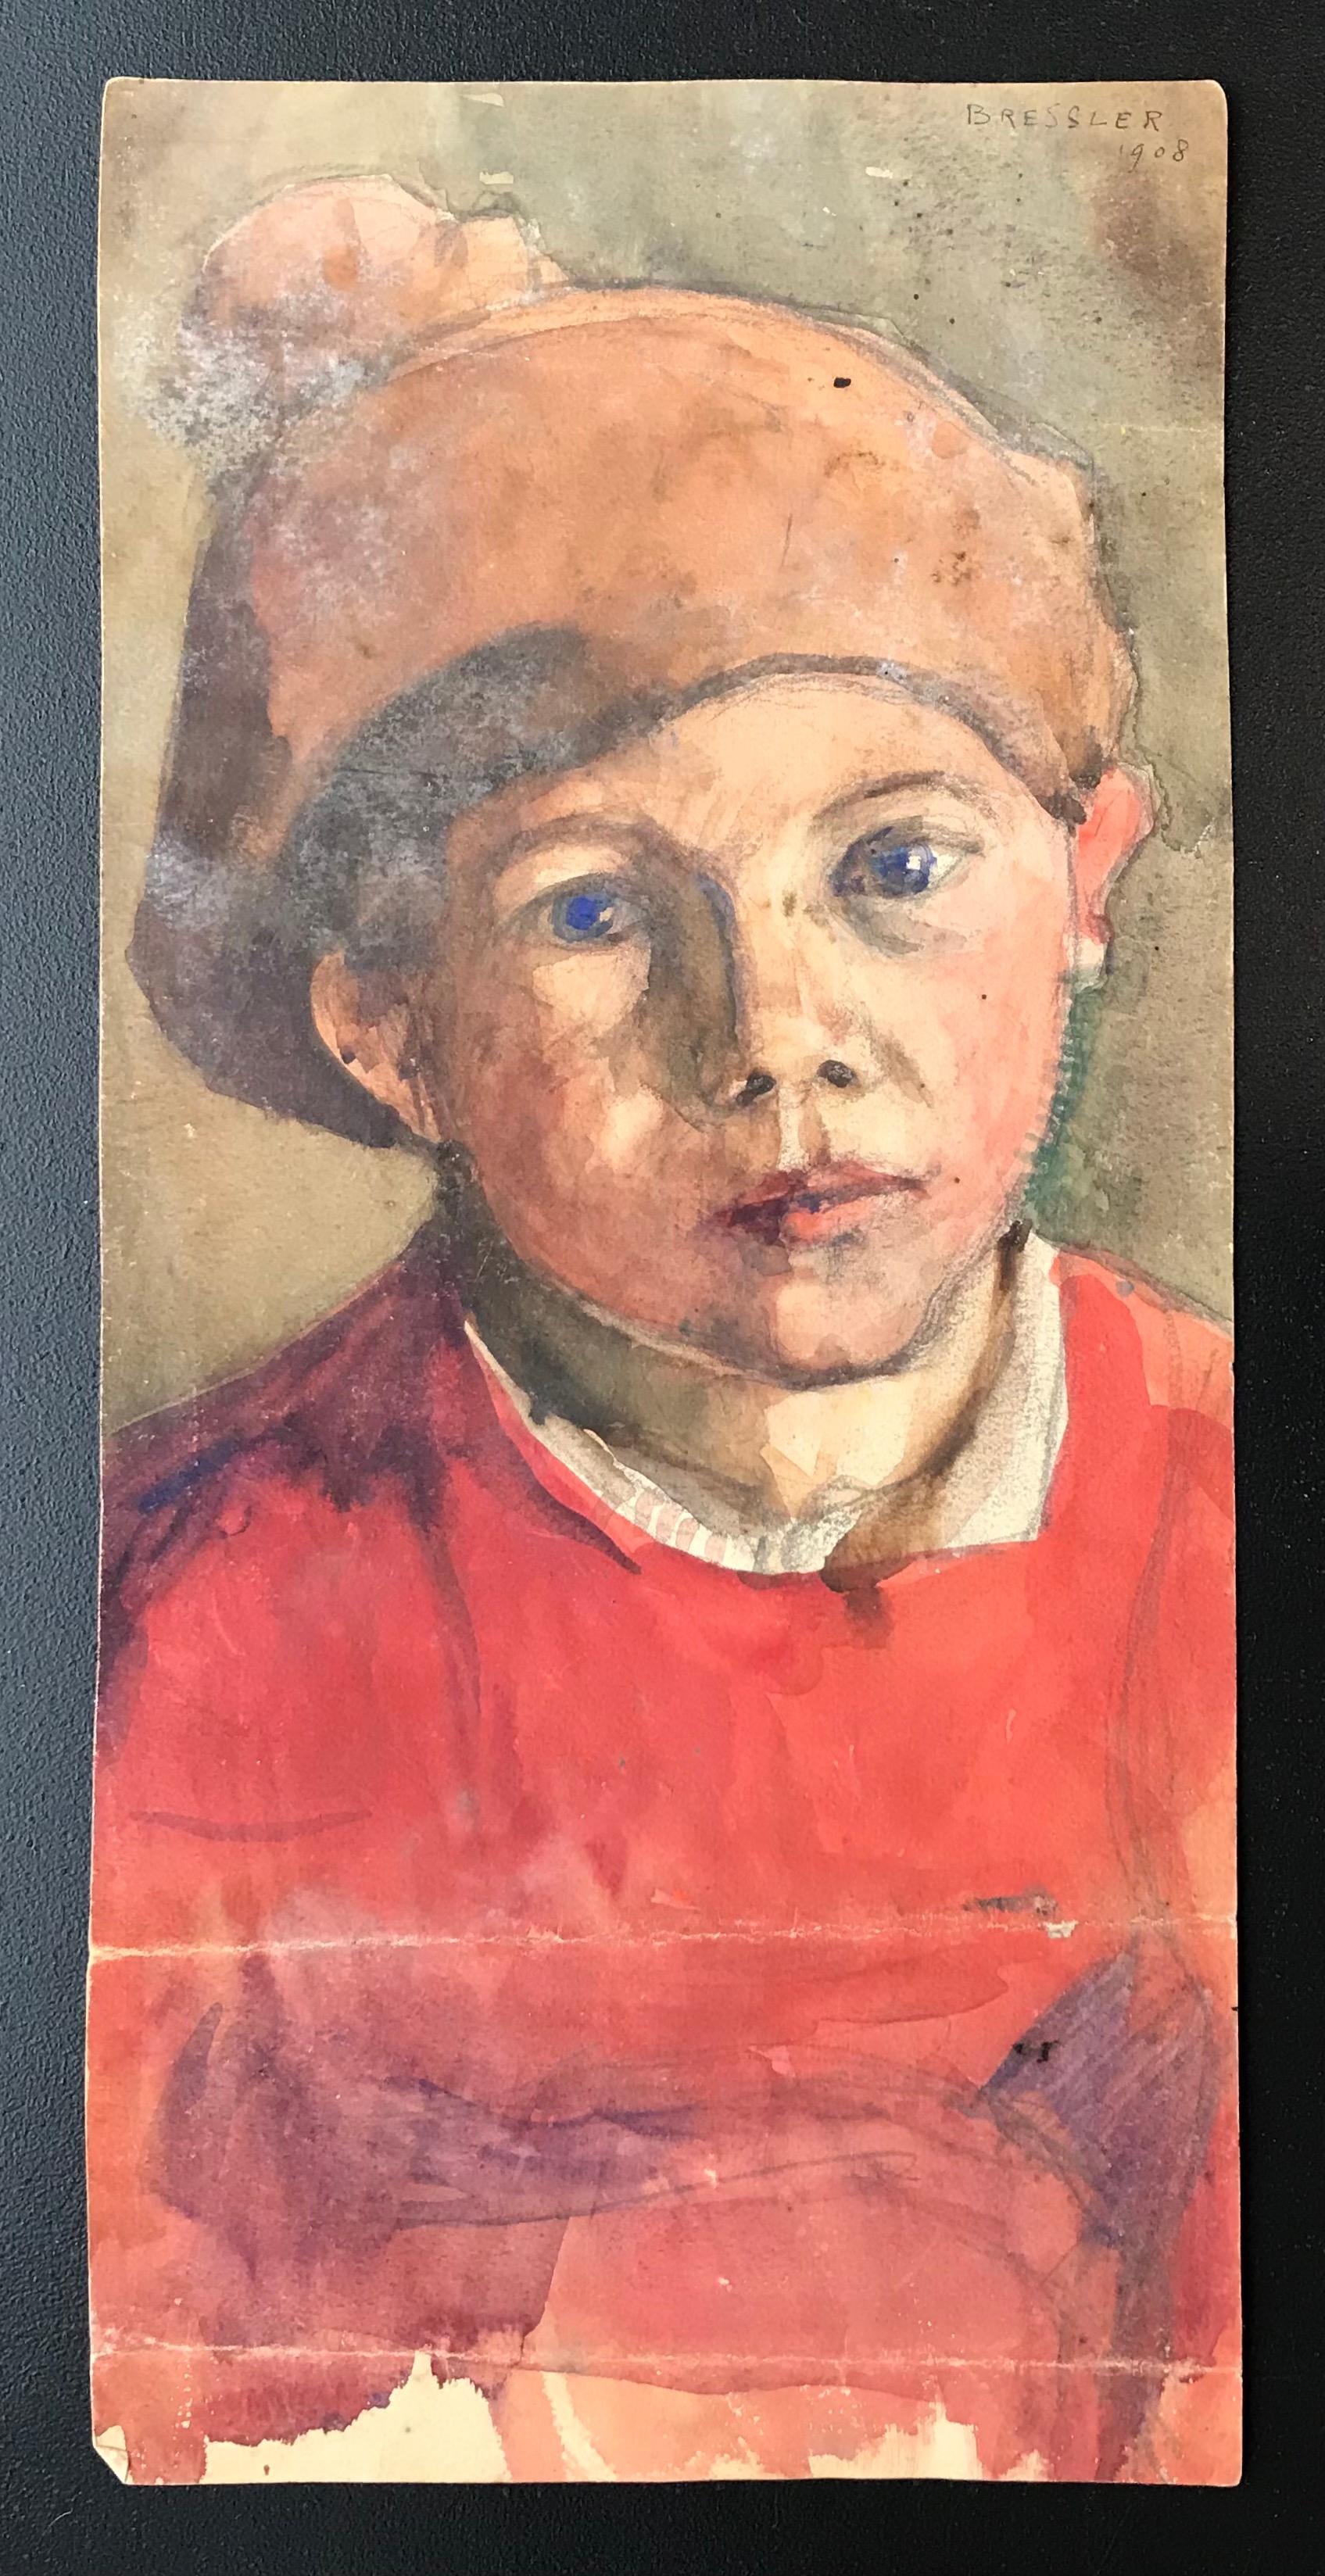 Young child with blue eyes - Painting by Emile Bressler